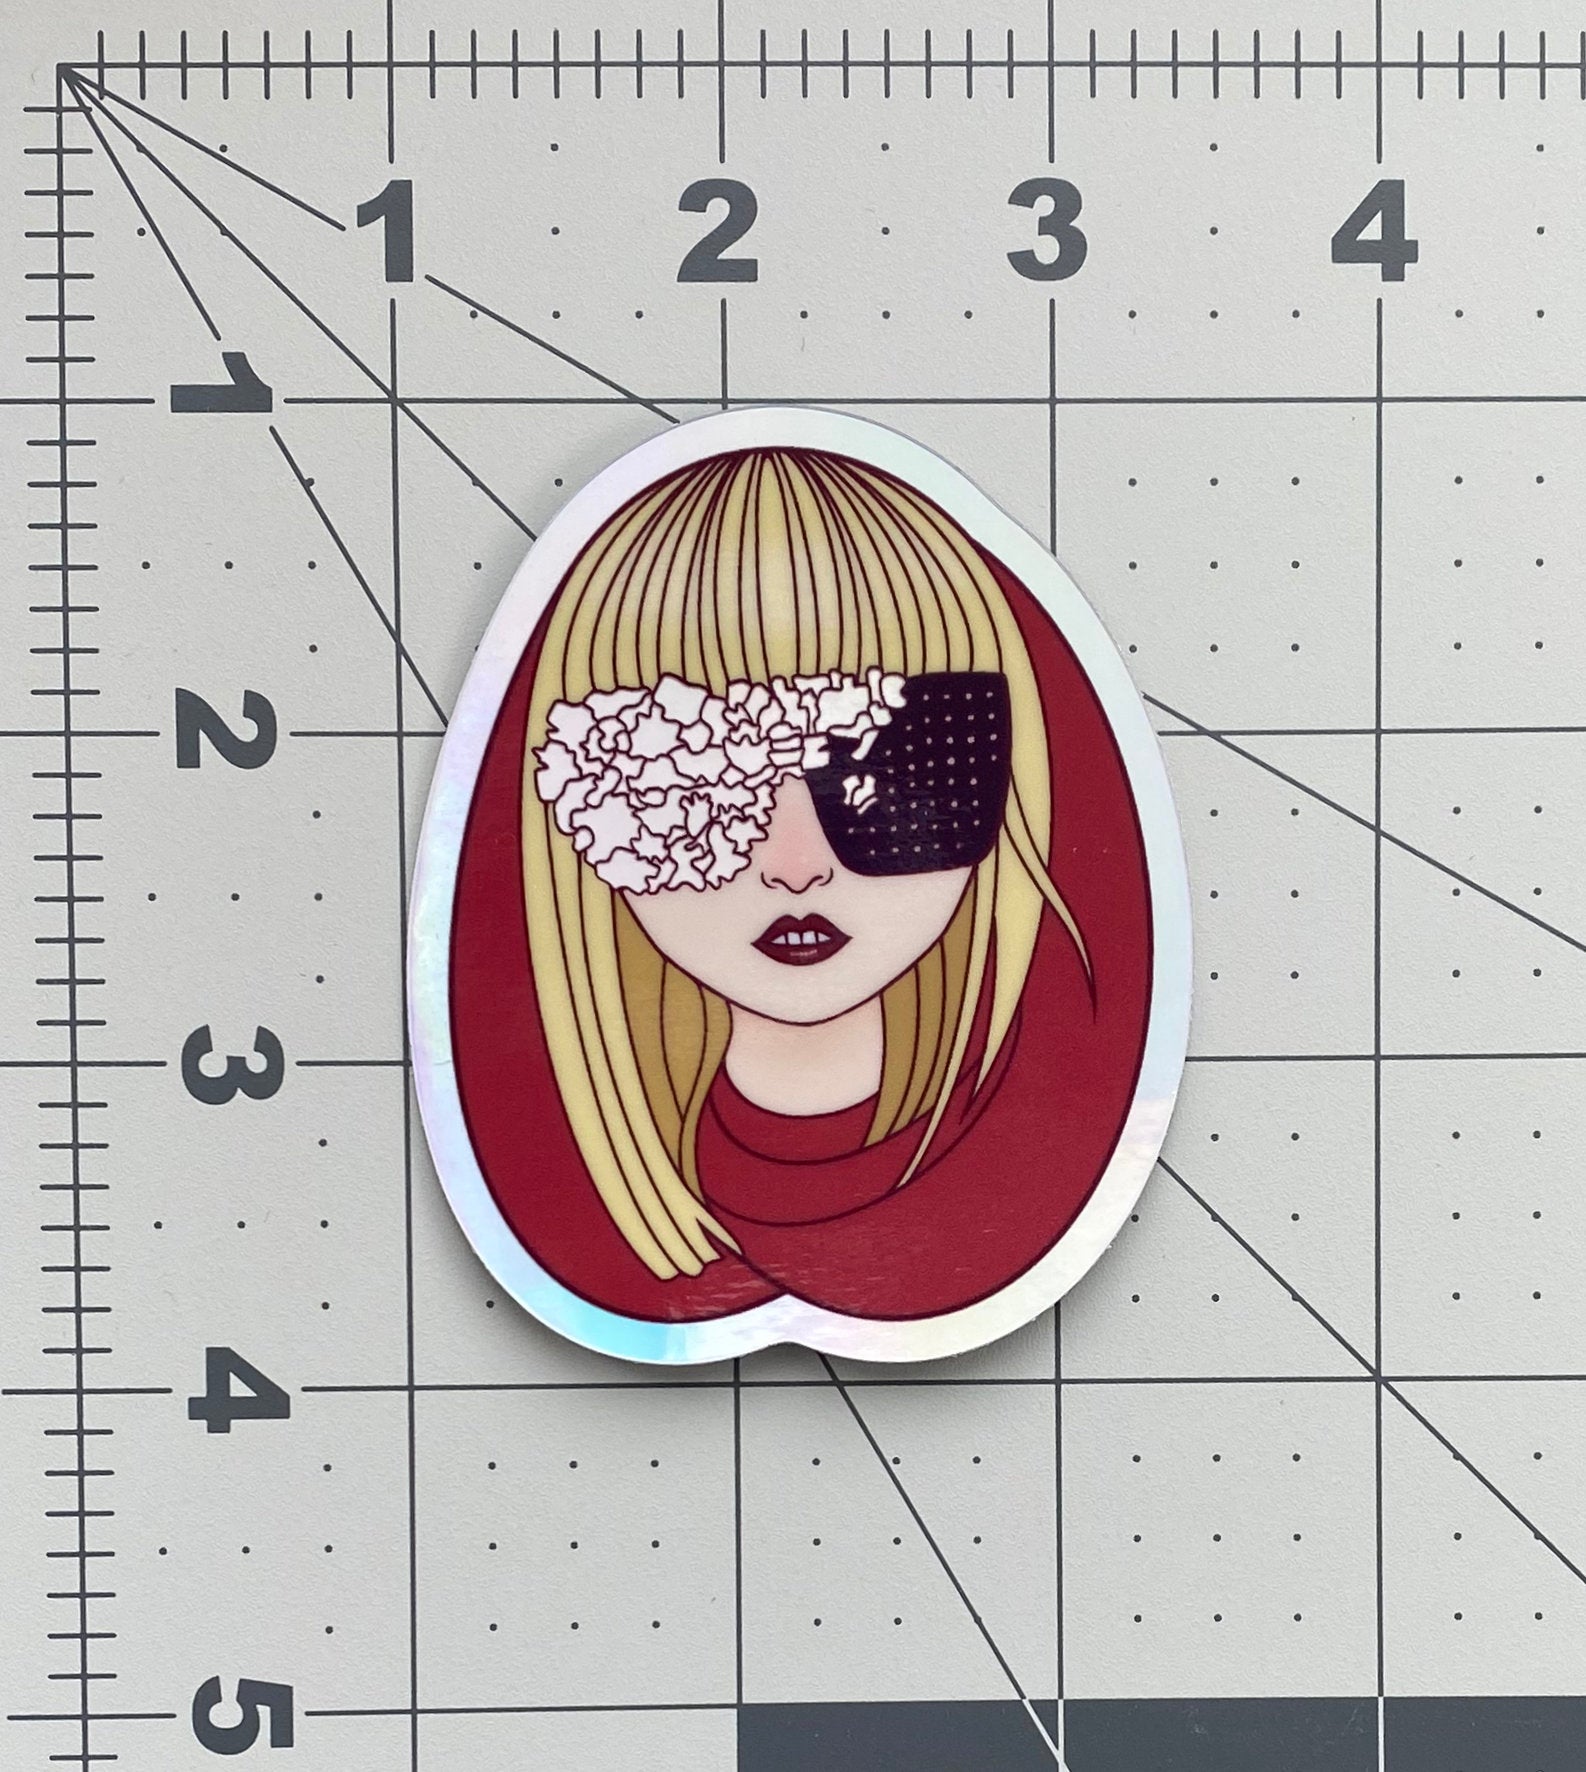 Illustrated sticker of Lady Gaga wearing a red hood and black and irridescent glasses against a ruled background to show sticker size